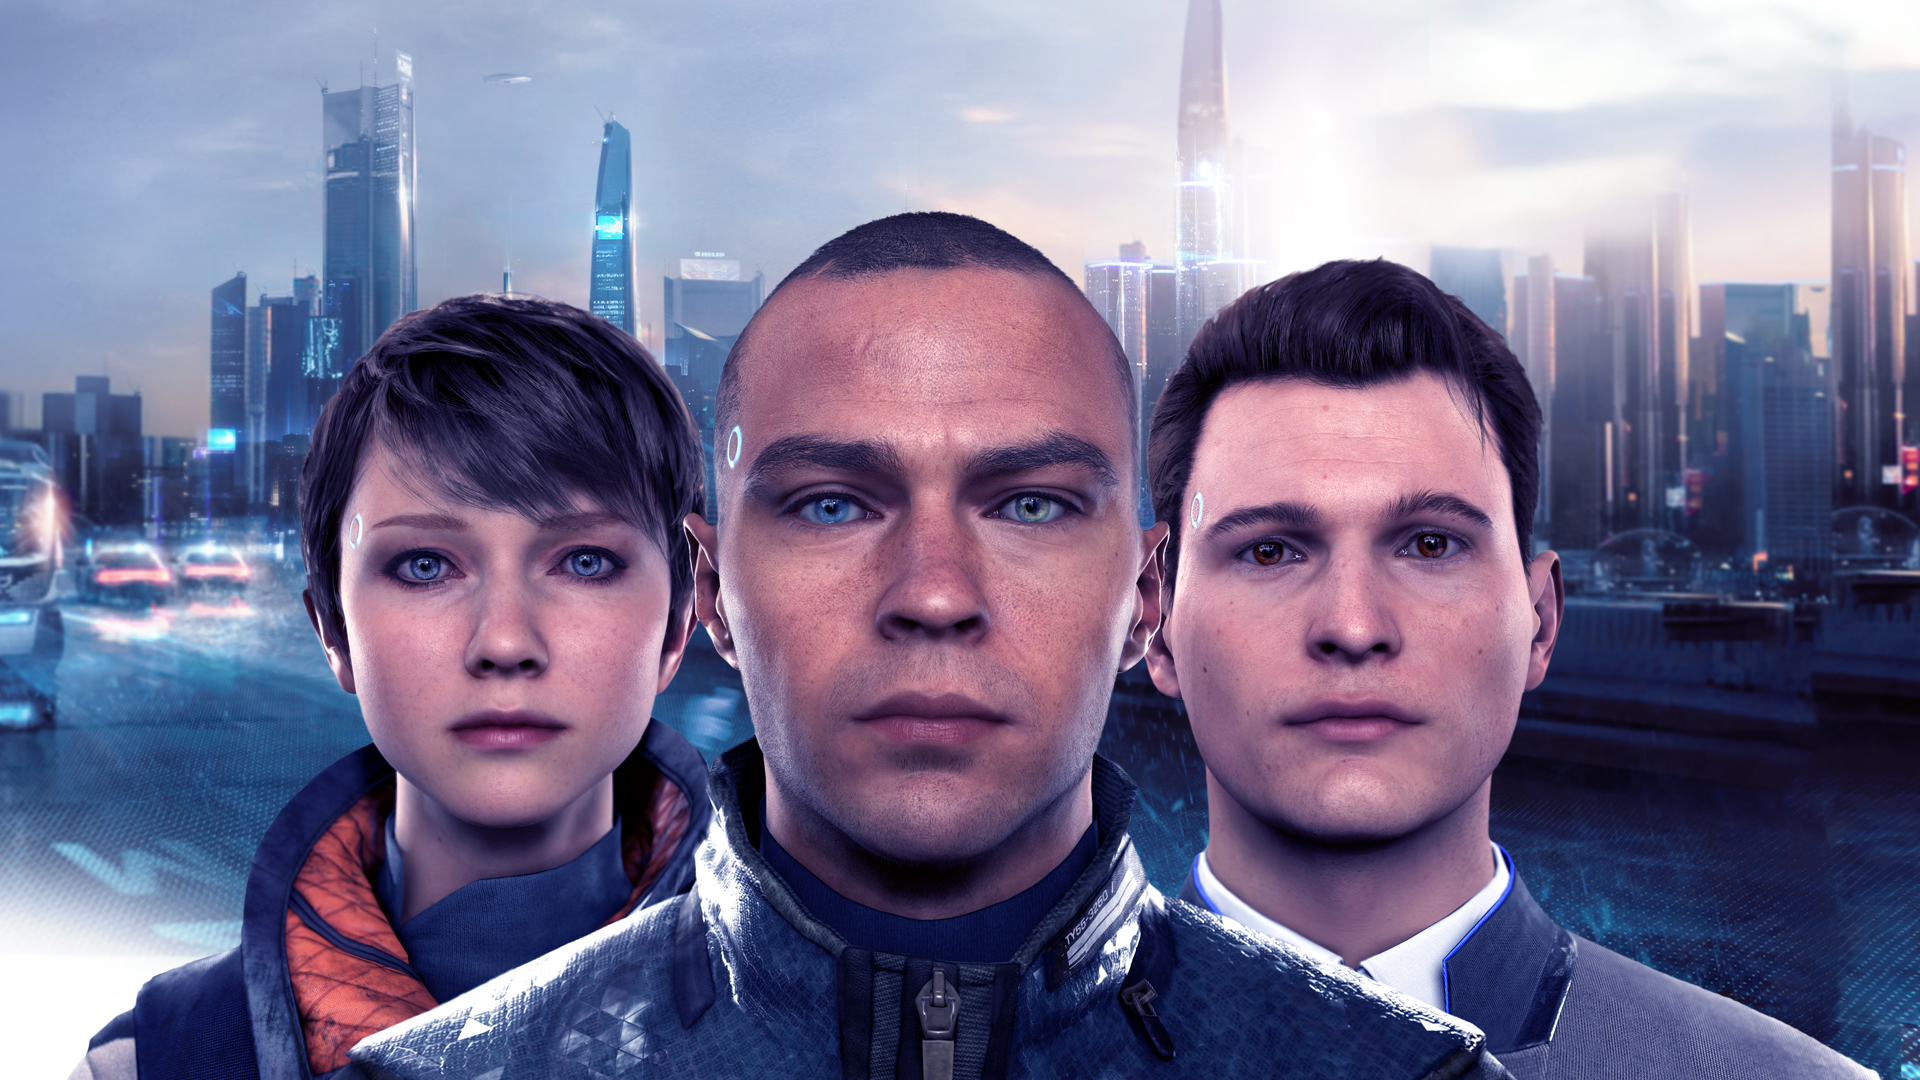 Androids Wallpaper From Detroit Become Human Gamepressurecom